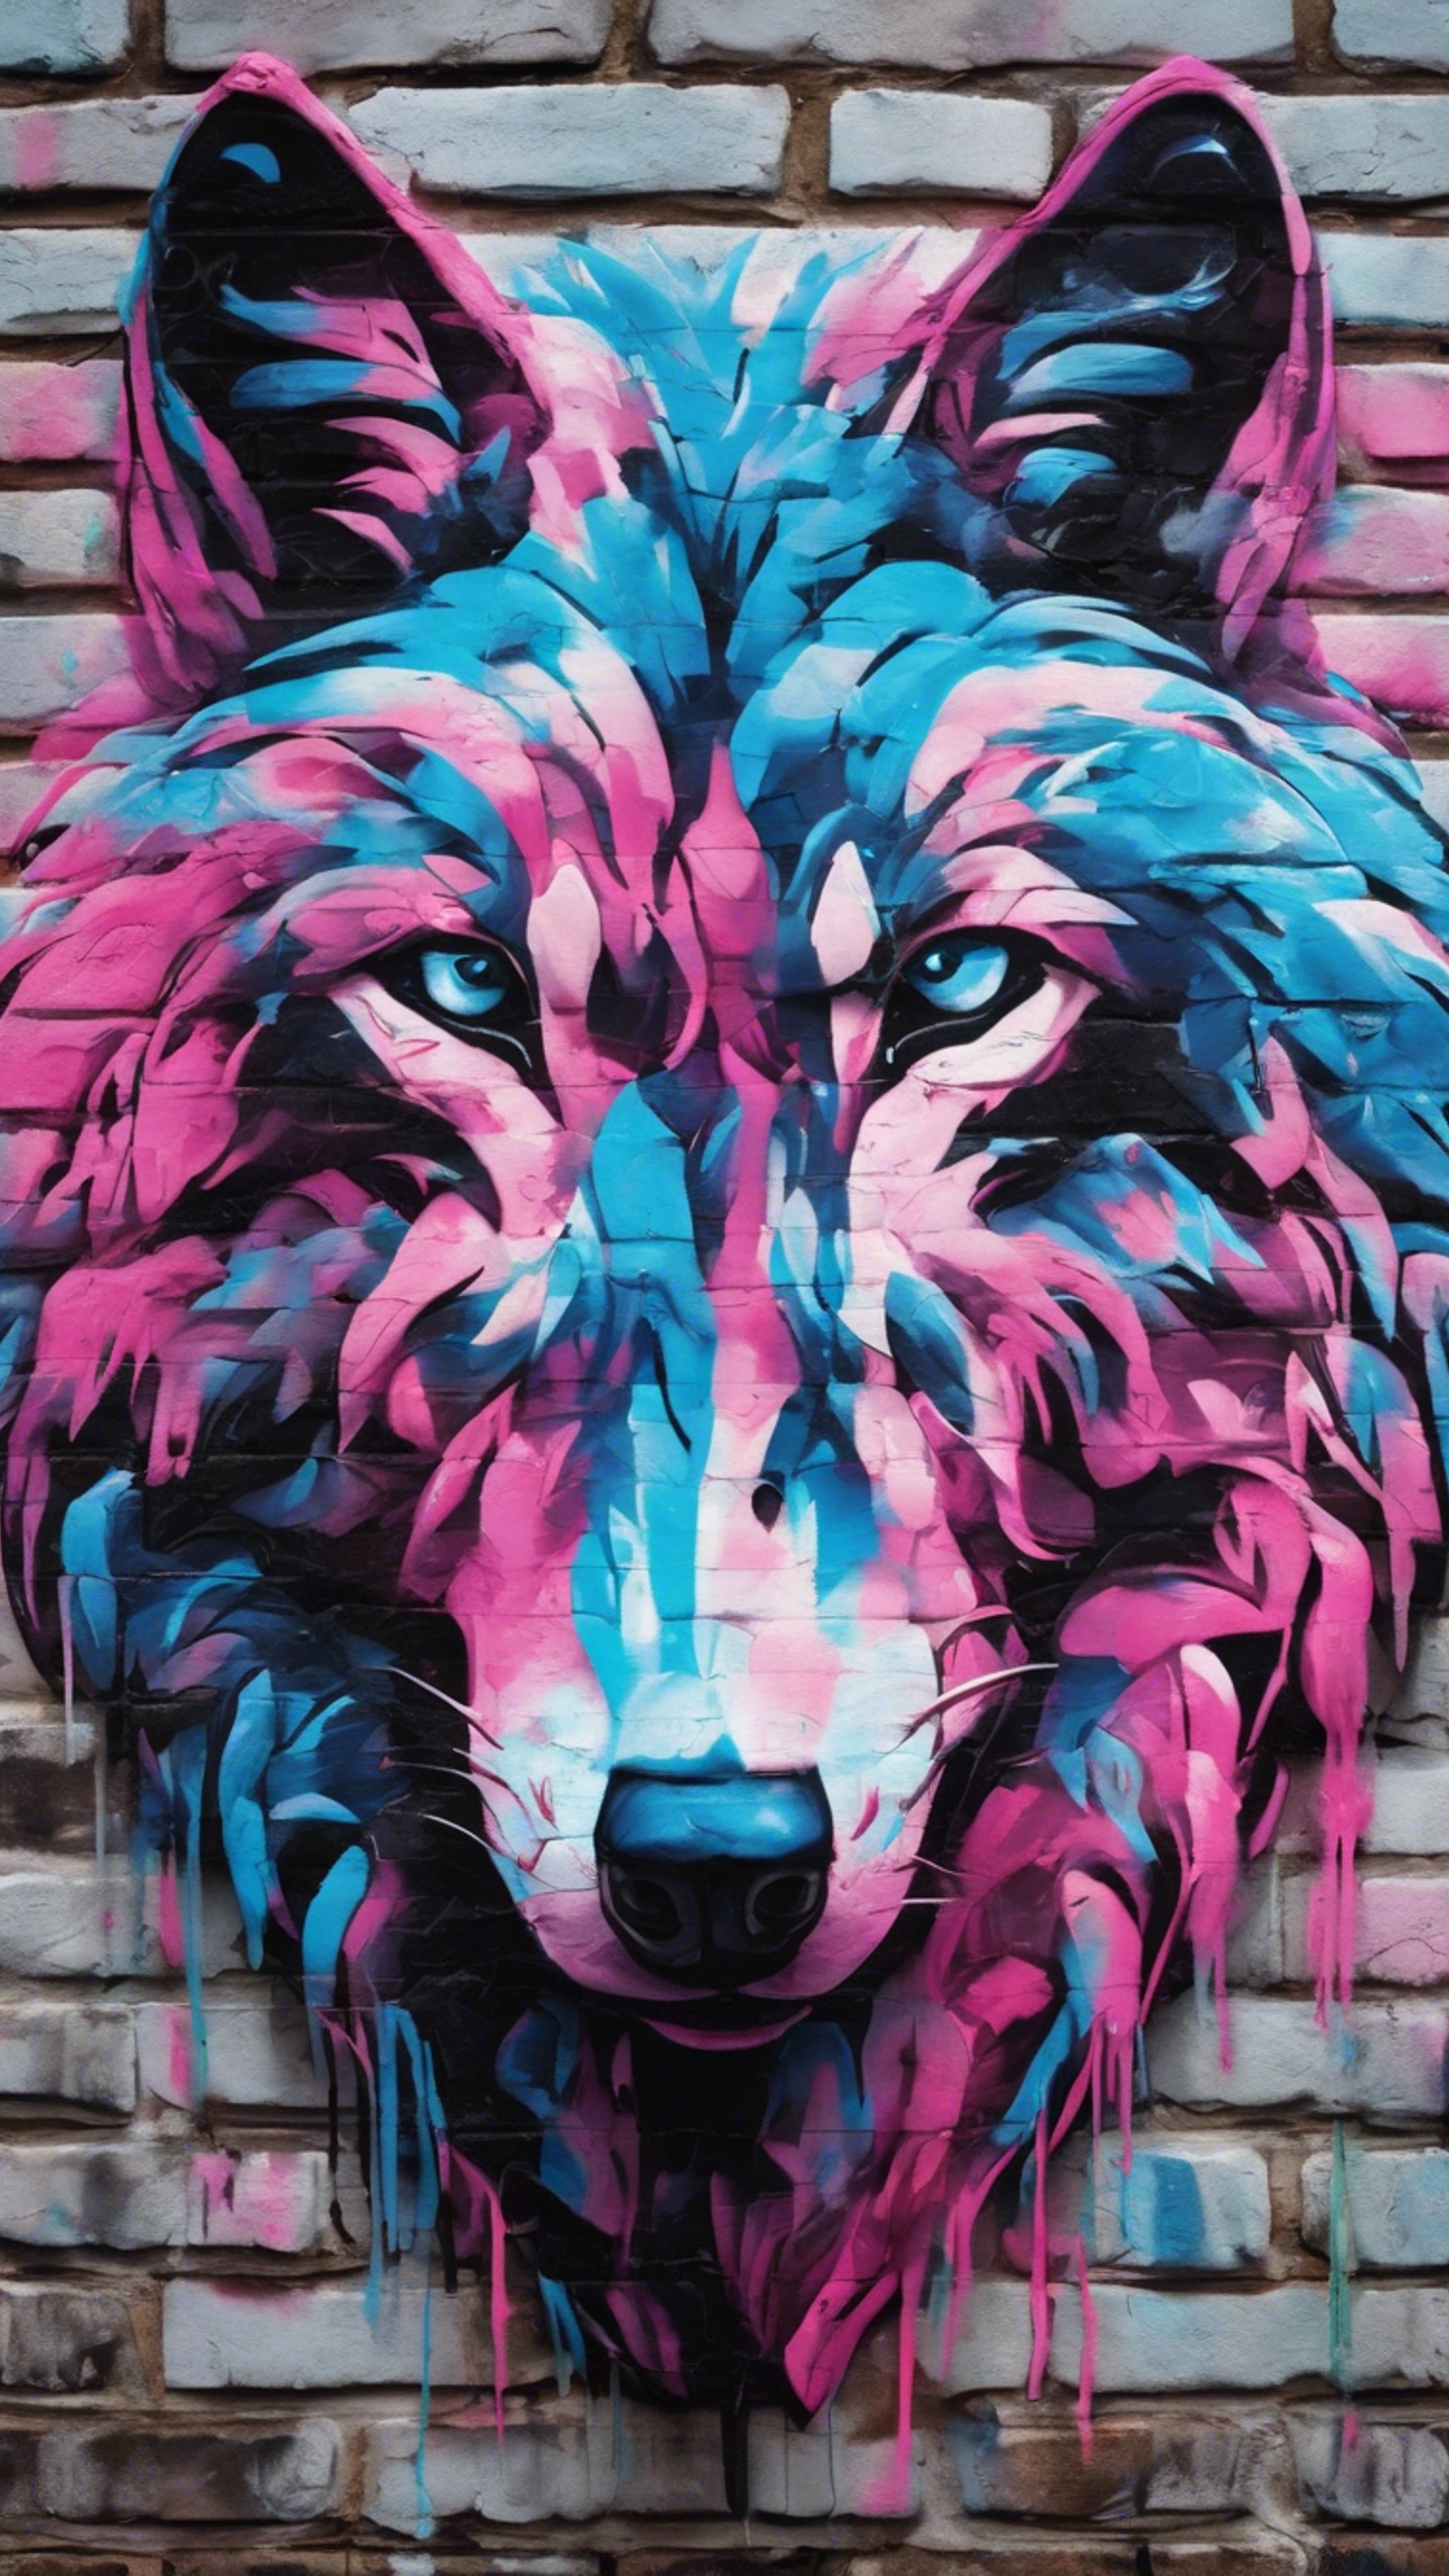 Graffiti of a vibrant, cosmic, cool wolf with neon blue and pink colors, painted across an urban brick wall.壁紙[a6ebfaca7d2e4cfbb51c]